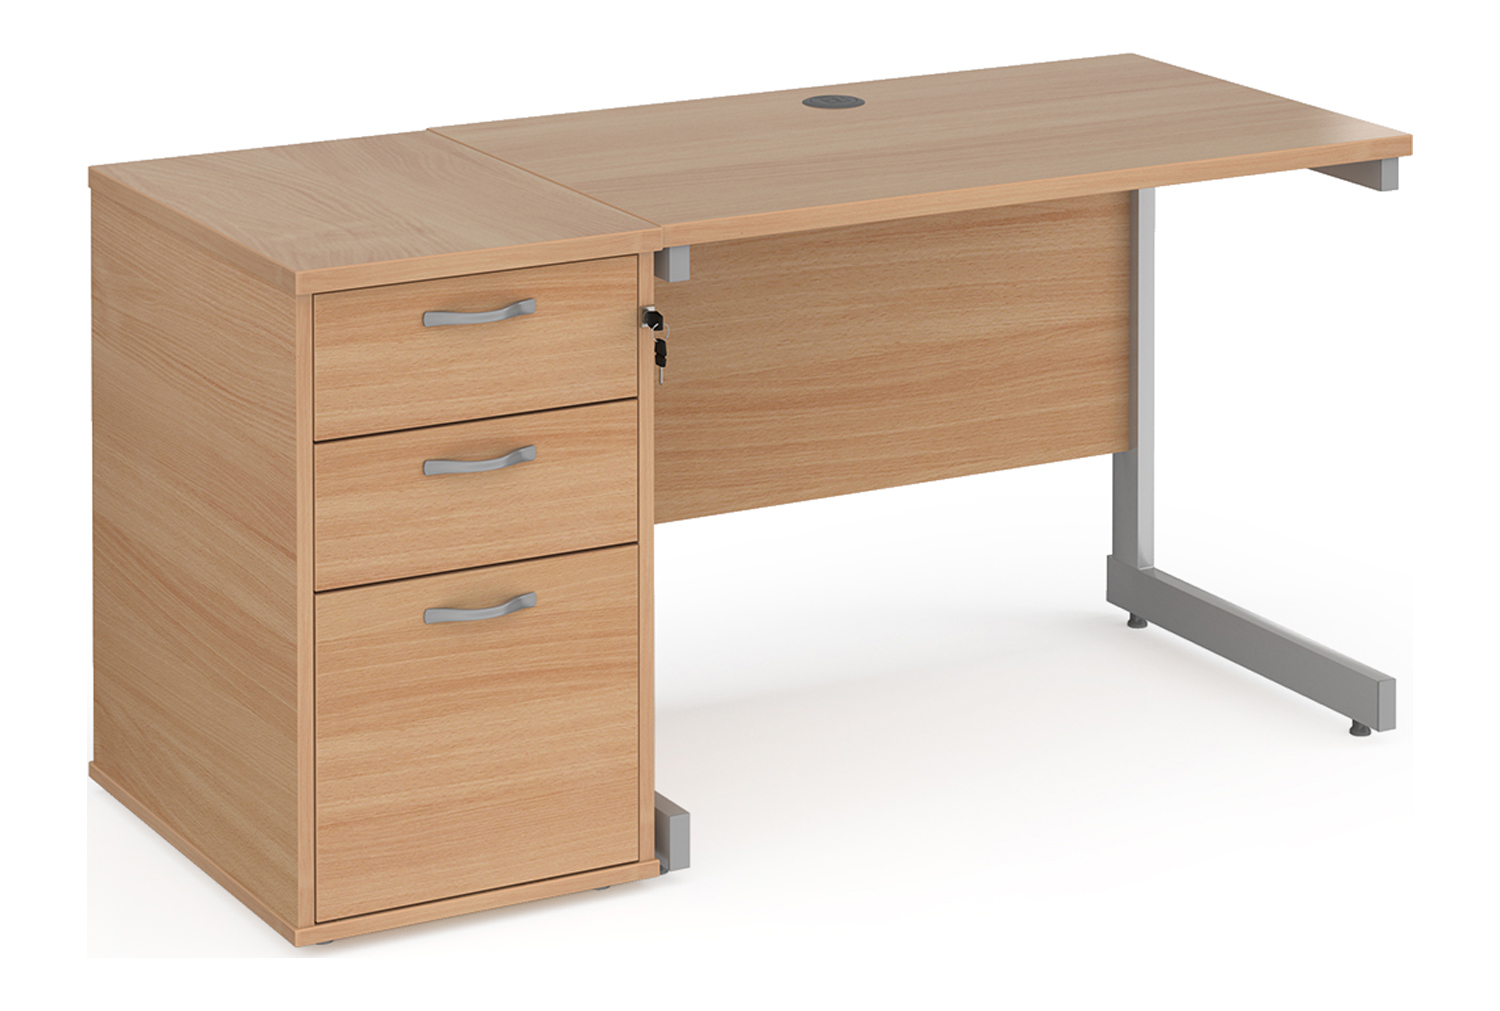 Thrifty Next-Day Office Desk Bundle Deal 4 Beech, 100wx60dx73h (cm), Express Delivery